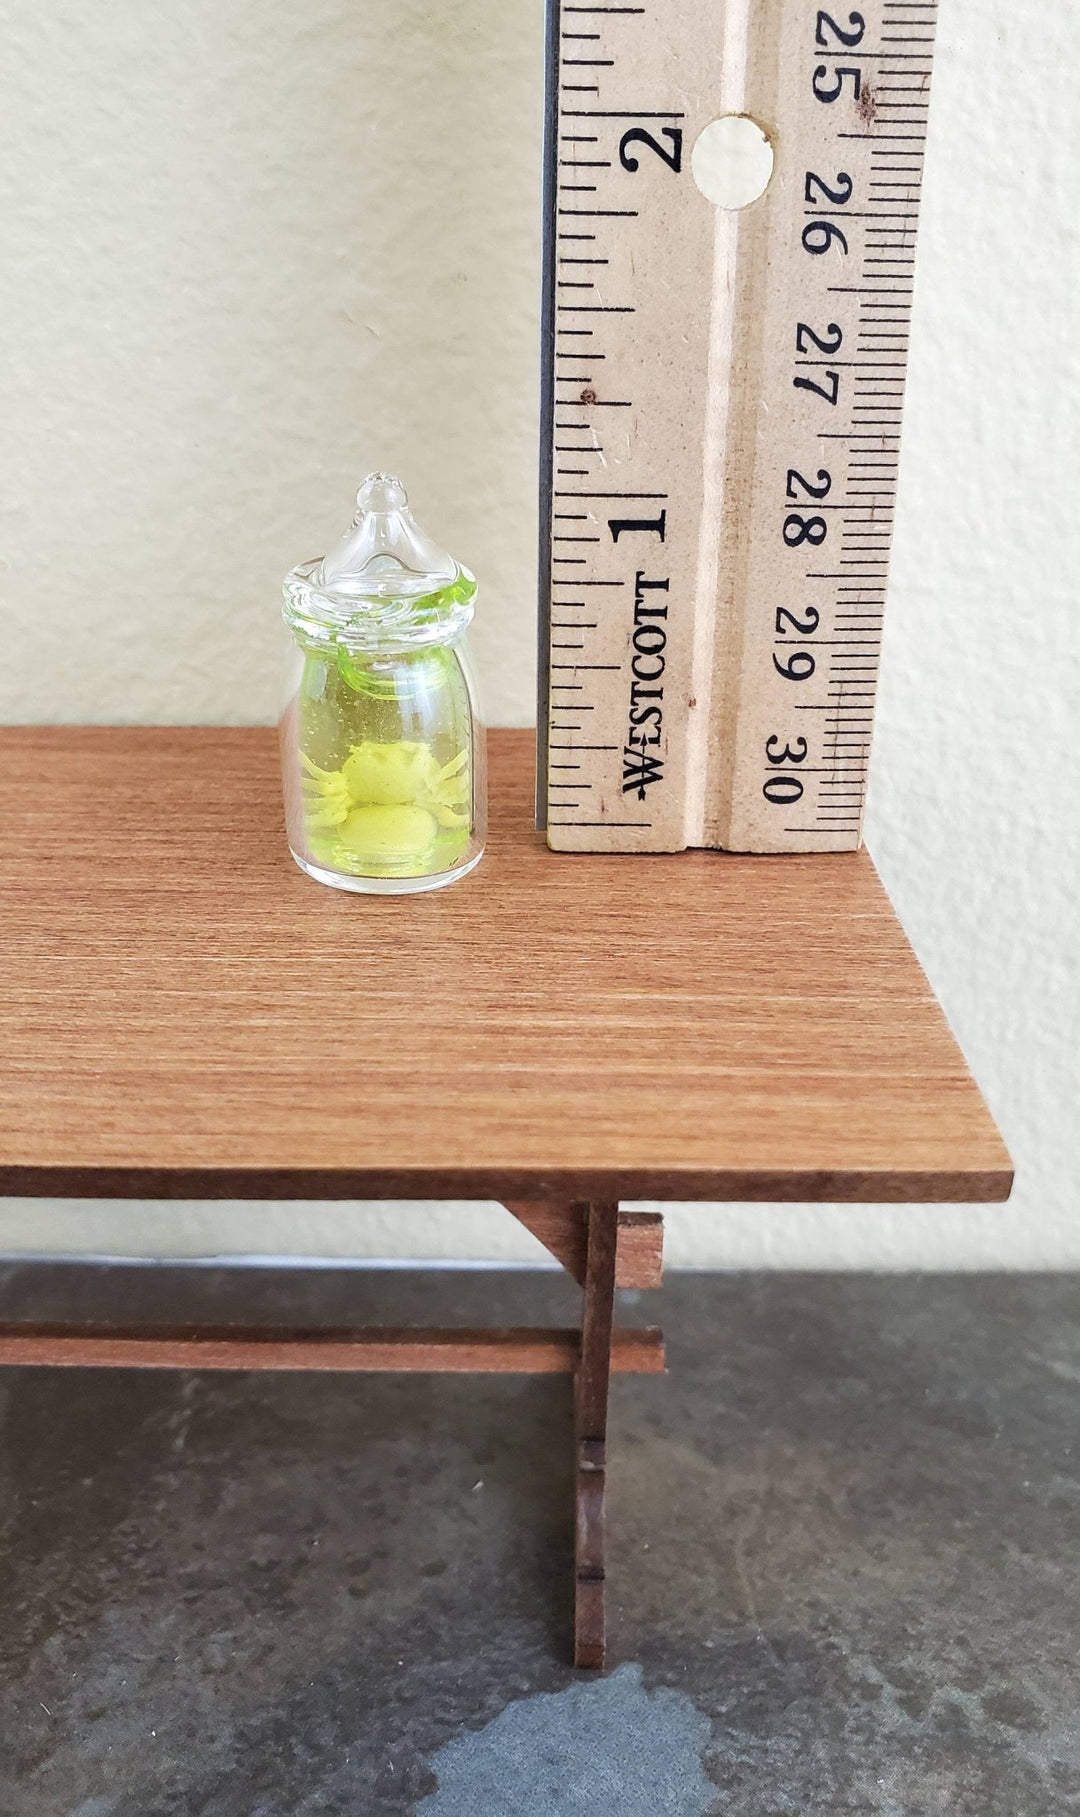 Dollhouse Miniature Spider in Glass Jar with Formaldehyde Large 1:12 Scale - Miniature Crush